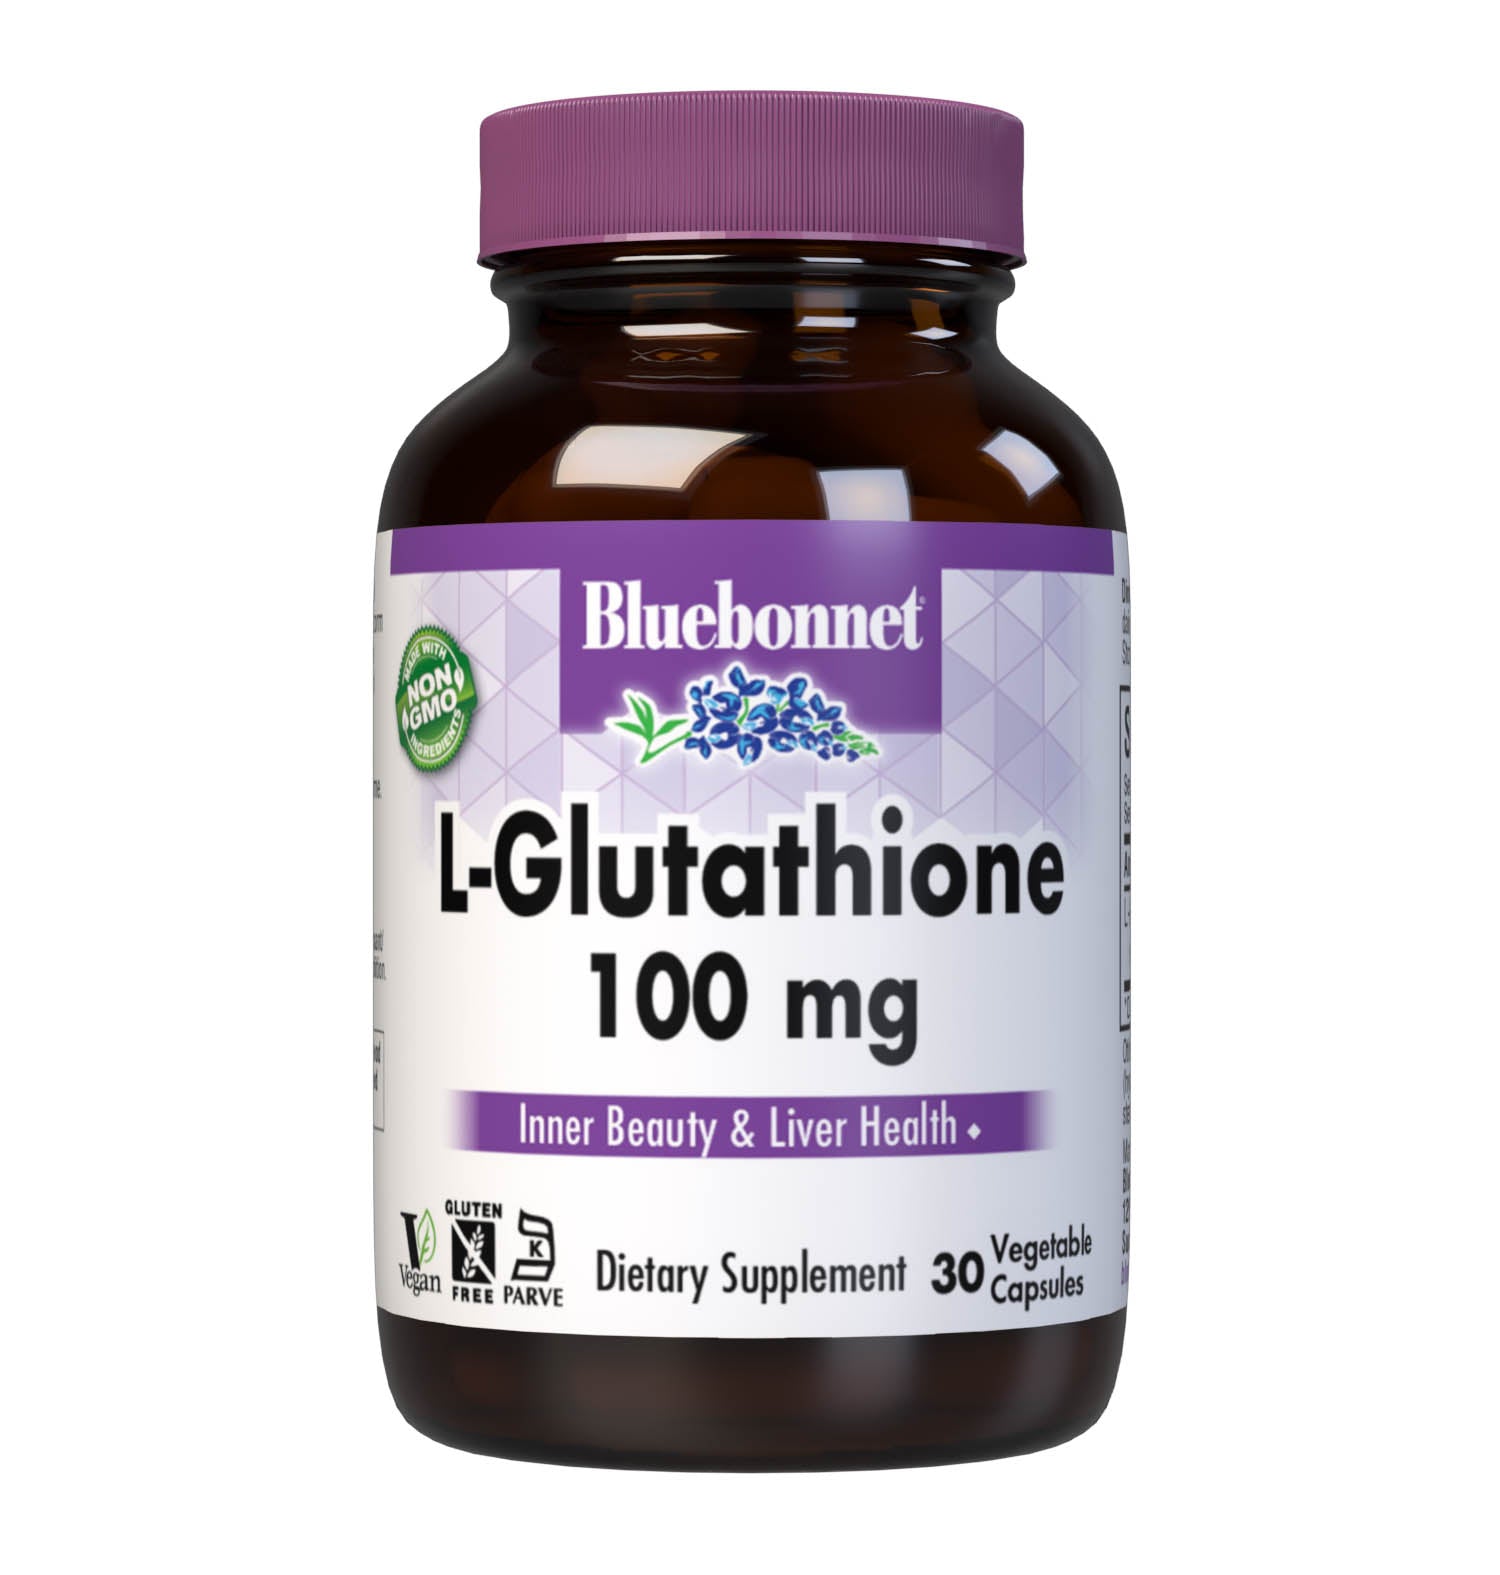 Bluebonnet’s L-Glutathione 100 mg 30 Vegetable Capsules are formulated with the free-form amino acid L-glutathione in its crystalline form. L-Glutathione protects against free-radical formation and supports inner beauty and liver health. #size_30 count